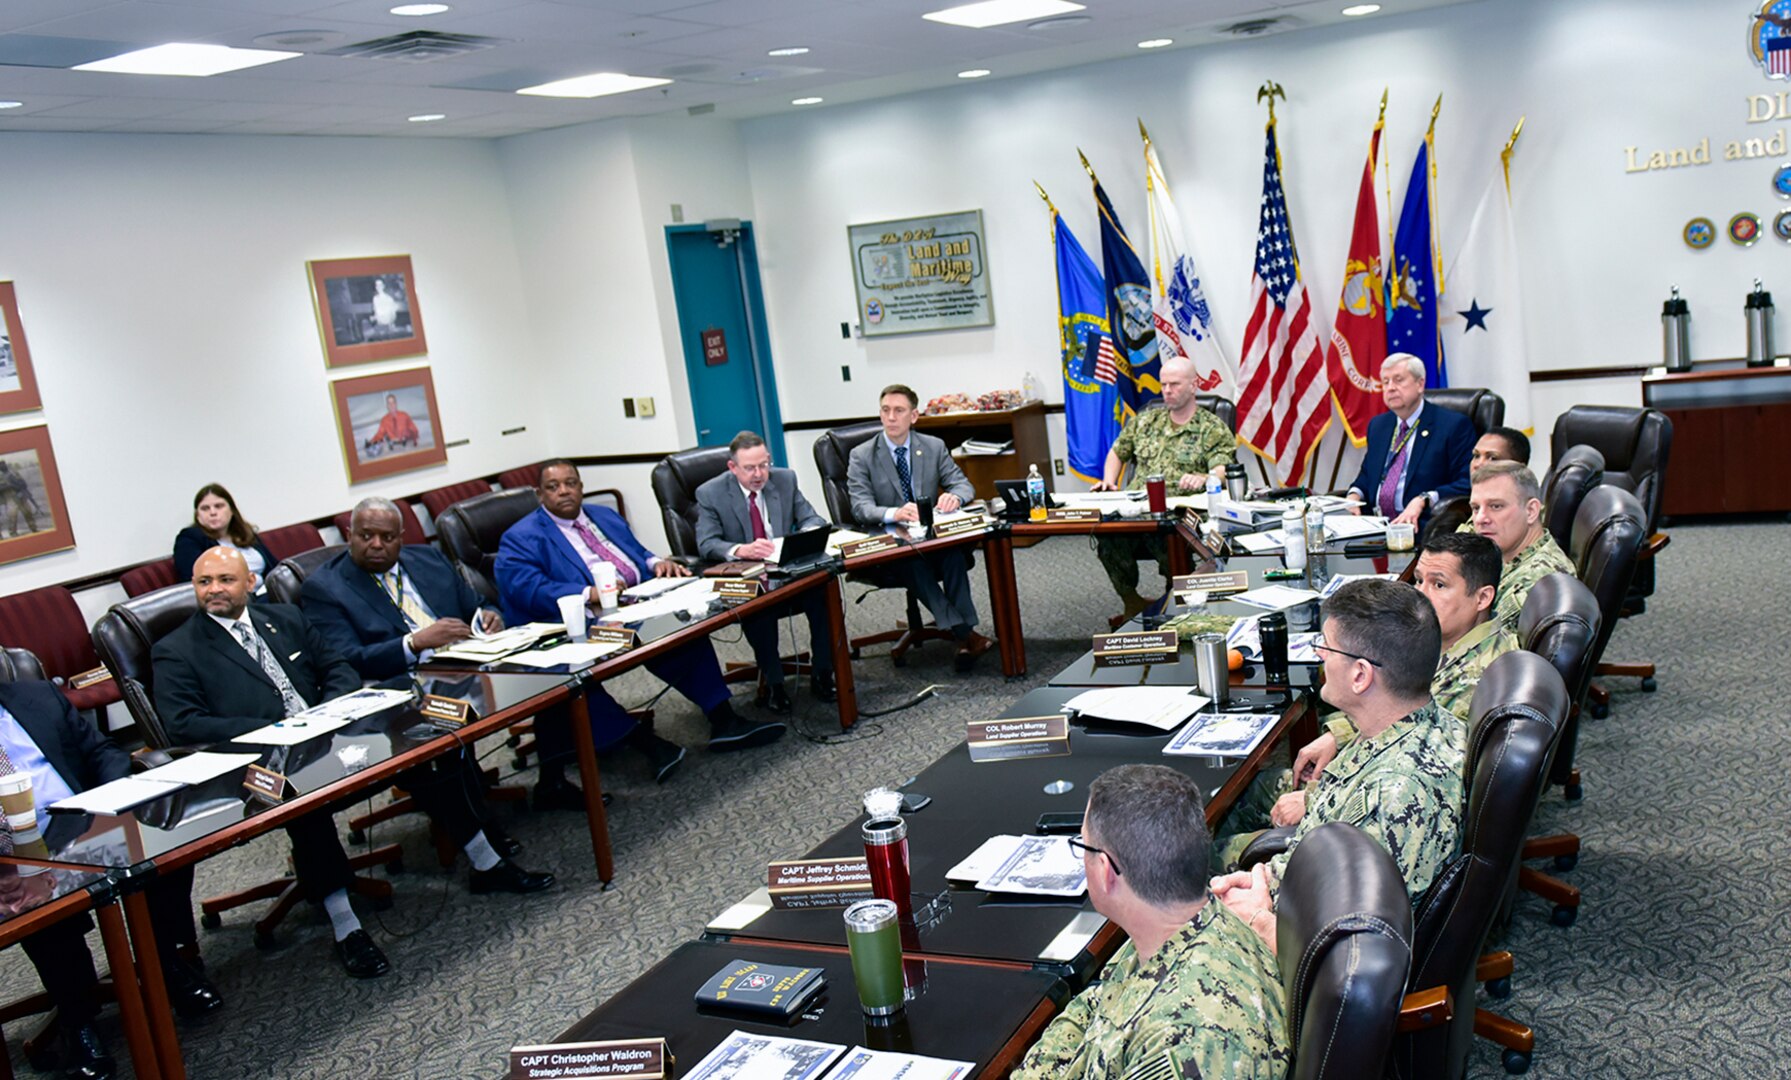 DLA Land and Maritime leadership sitting at a table.